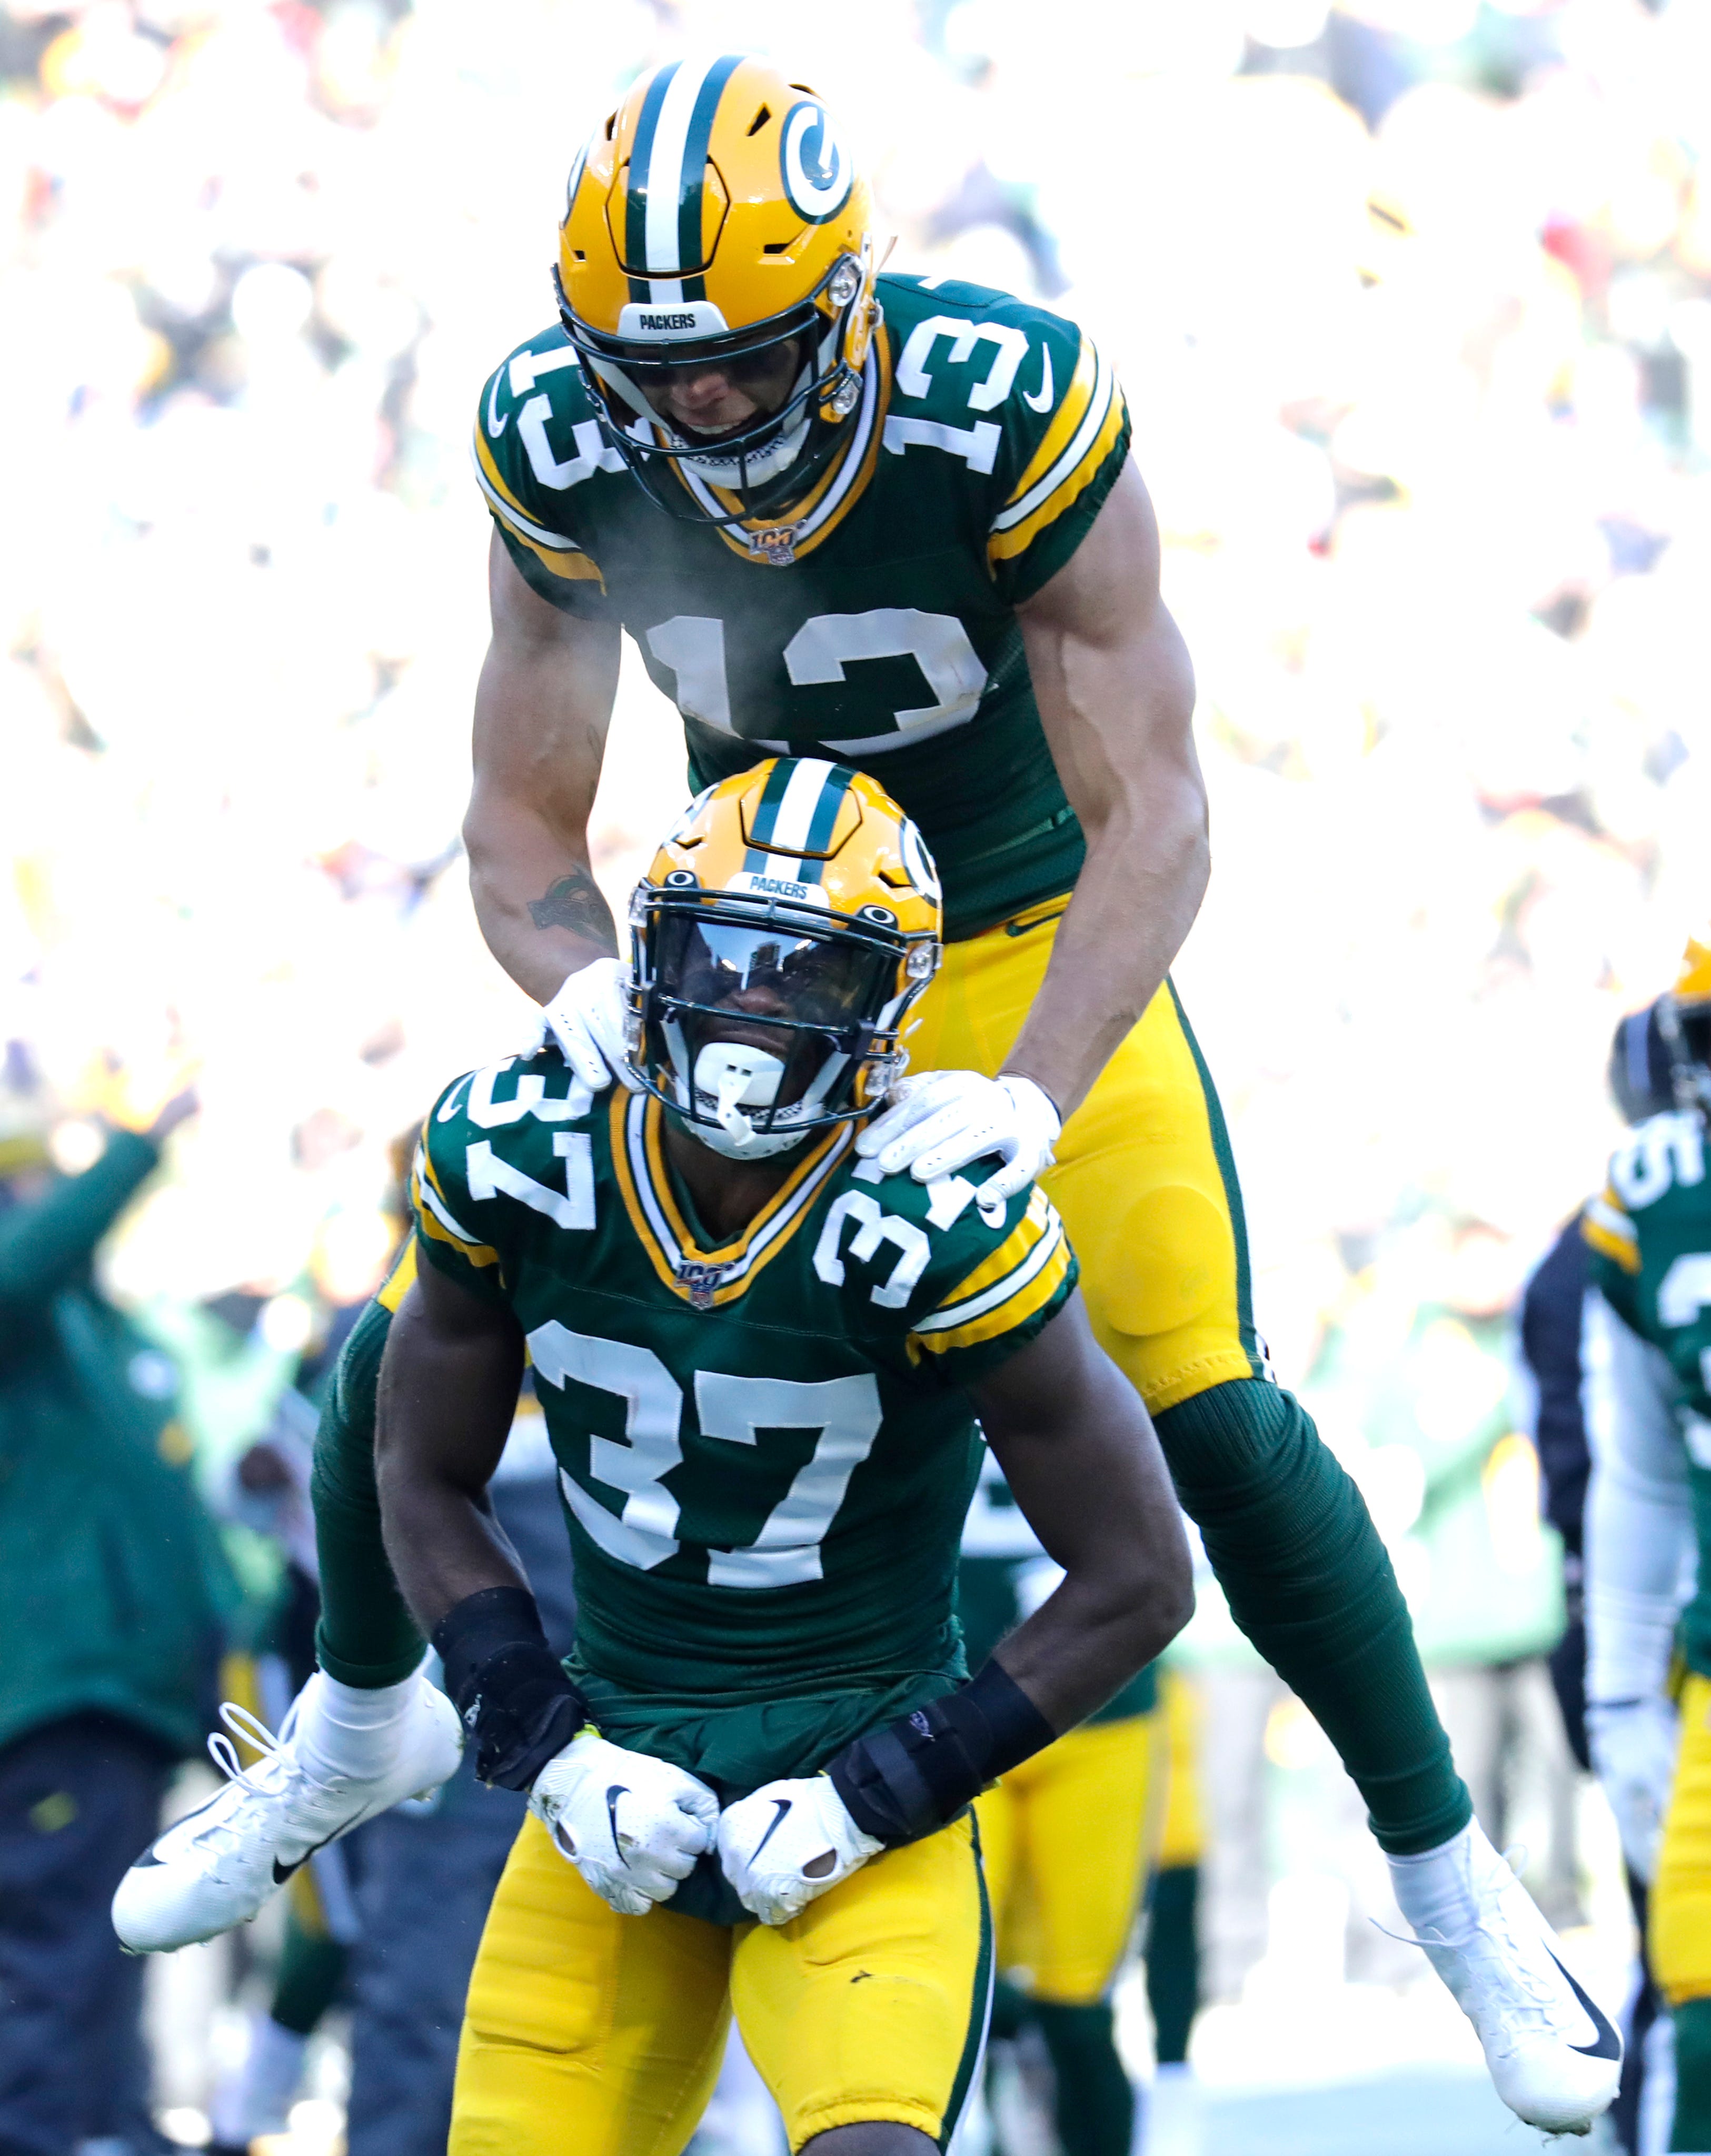 Green Bay Packers cornerback Josh Jackson (37) celebrates making a tackle on the kickoff with Allen Lazard (13) in the first quarter against the Chicago Bears Sunday, December 15, 2019, at Lambeau Field in Green Bay, Wis.